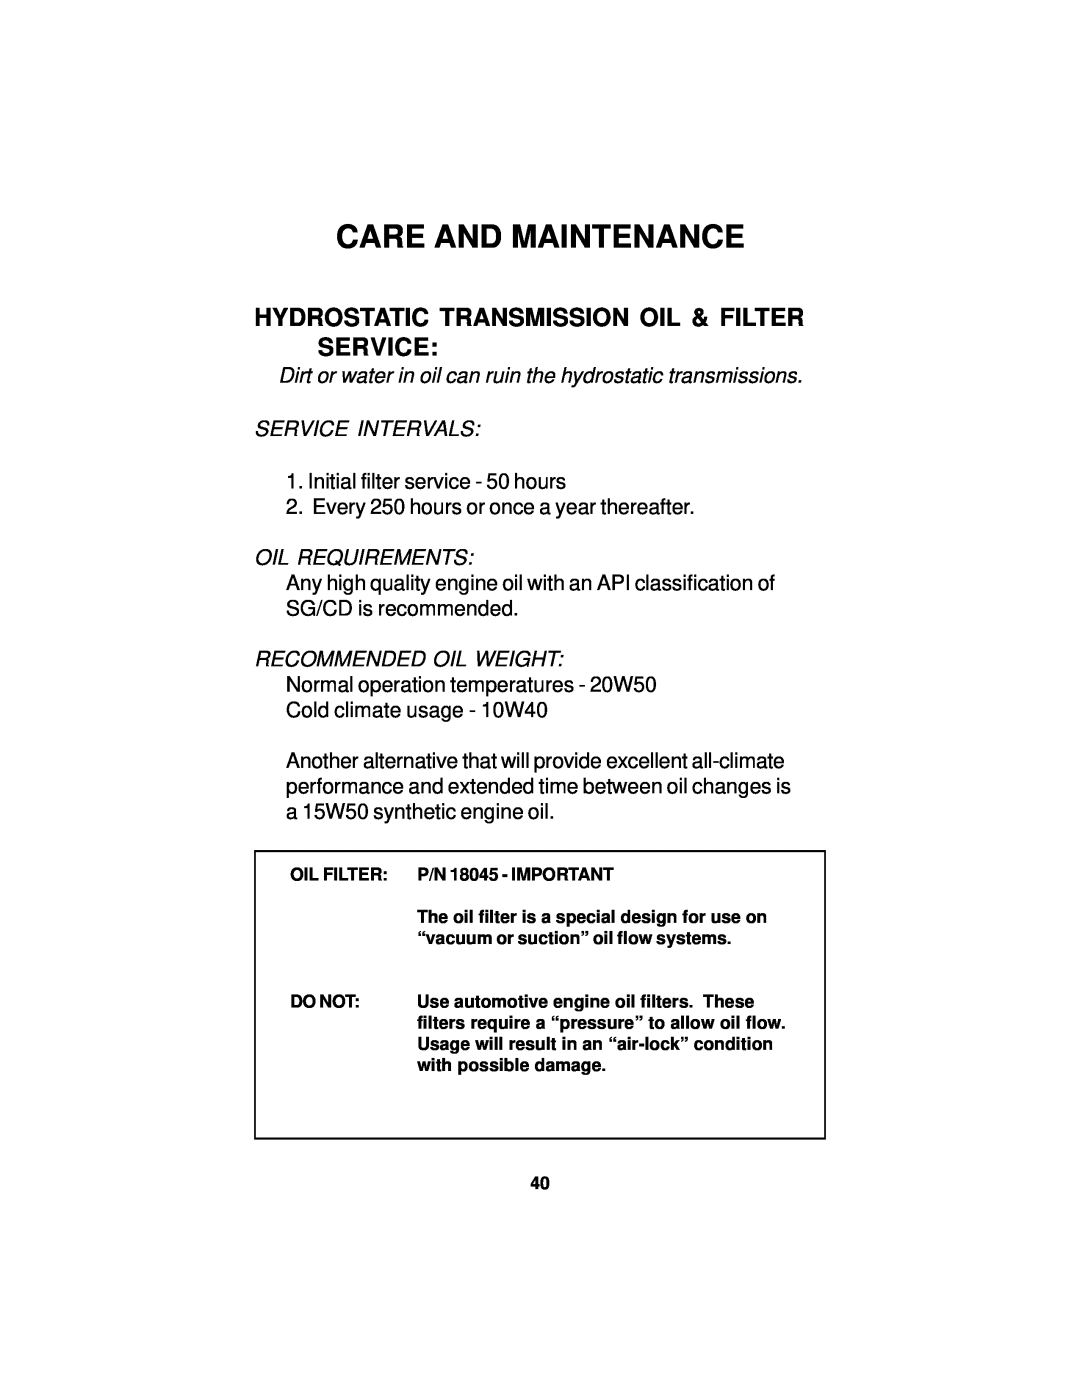 Dixon 18124-0804 Hydrostatic Transmission Oil & Filter Service, Care And Maintenance, Service Intervals, Oil Requirements 